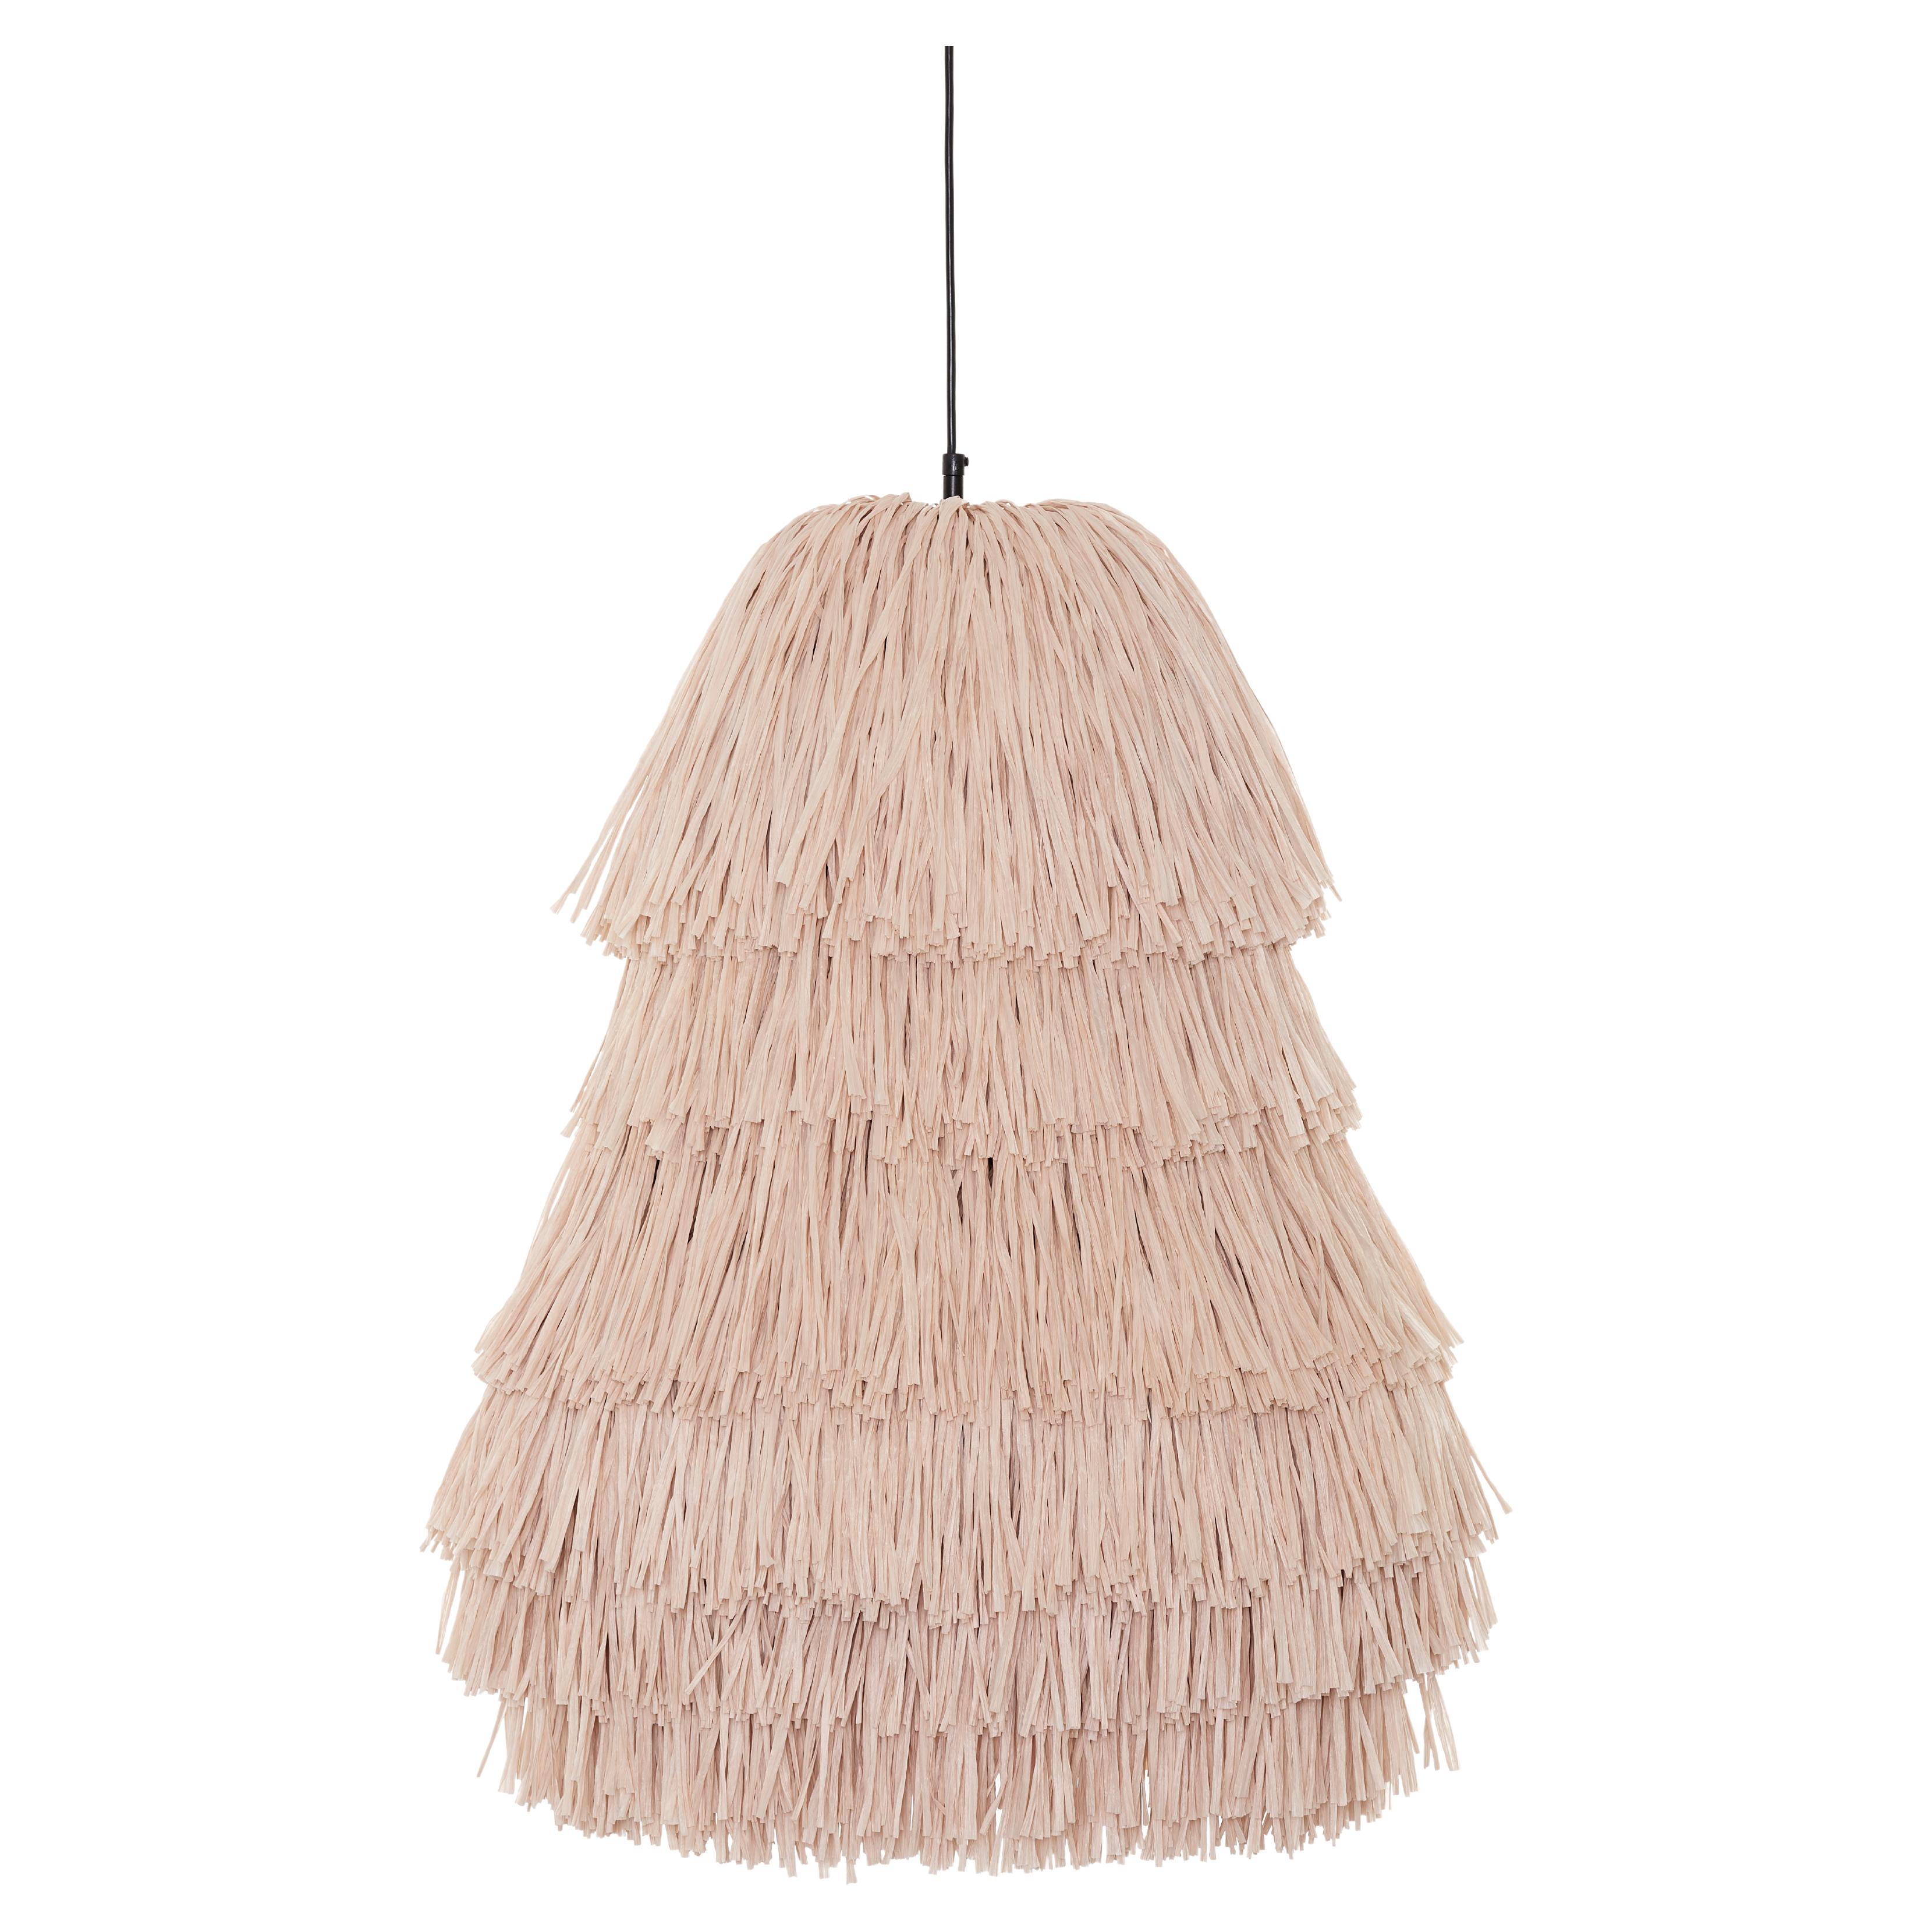 Red Fran RS lamp by Llot Llov
Handcrafted Light Object
Dimensions: Ø 60 cm x H: 70 cm
Materials: raffia fringes
Colour: red
Also available in green, beige, black. 

With their bulky silhouette and rustling fringes, the FRAN lights are